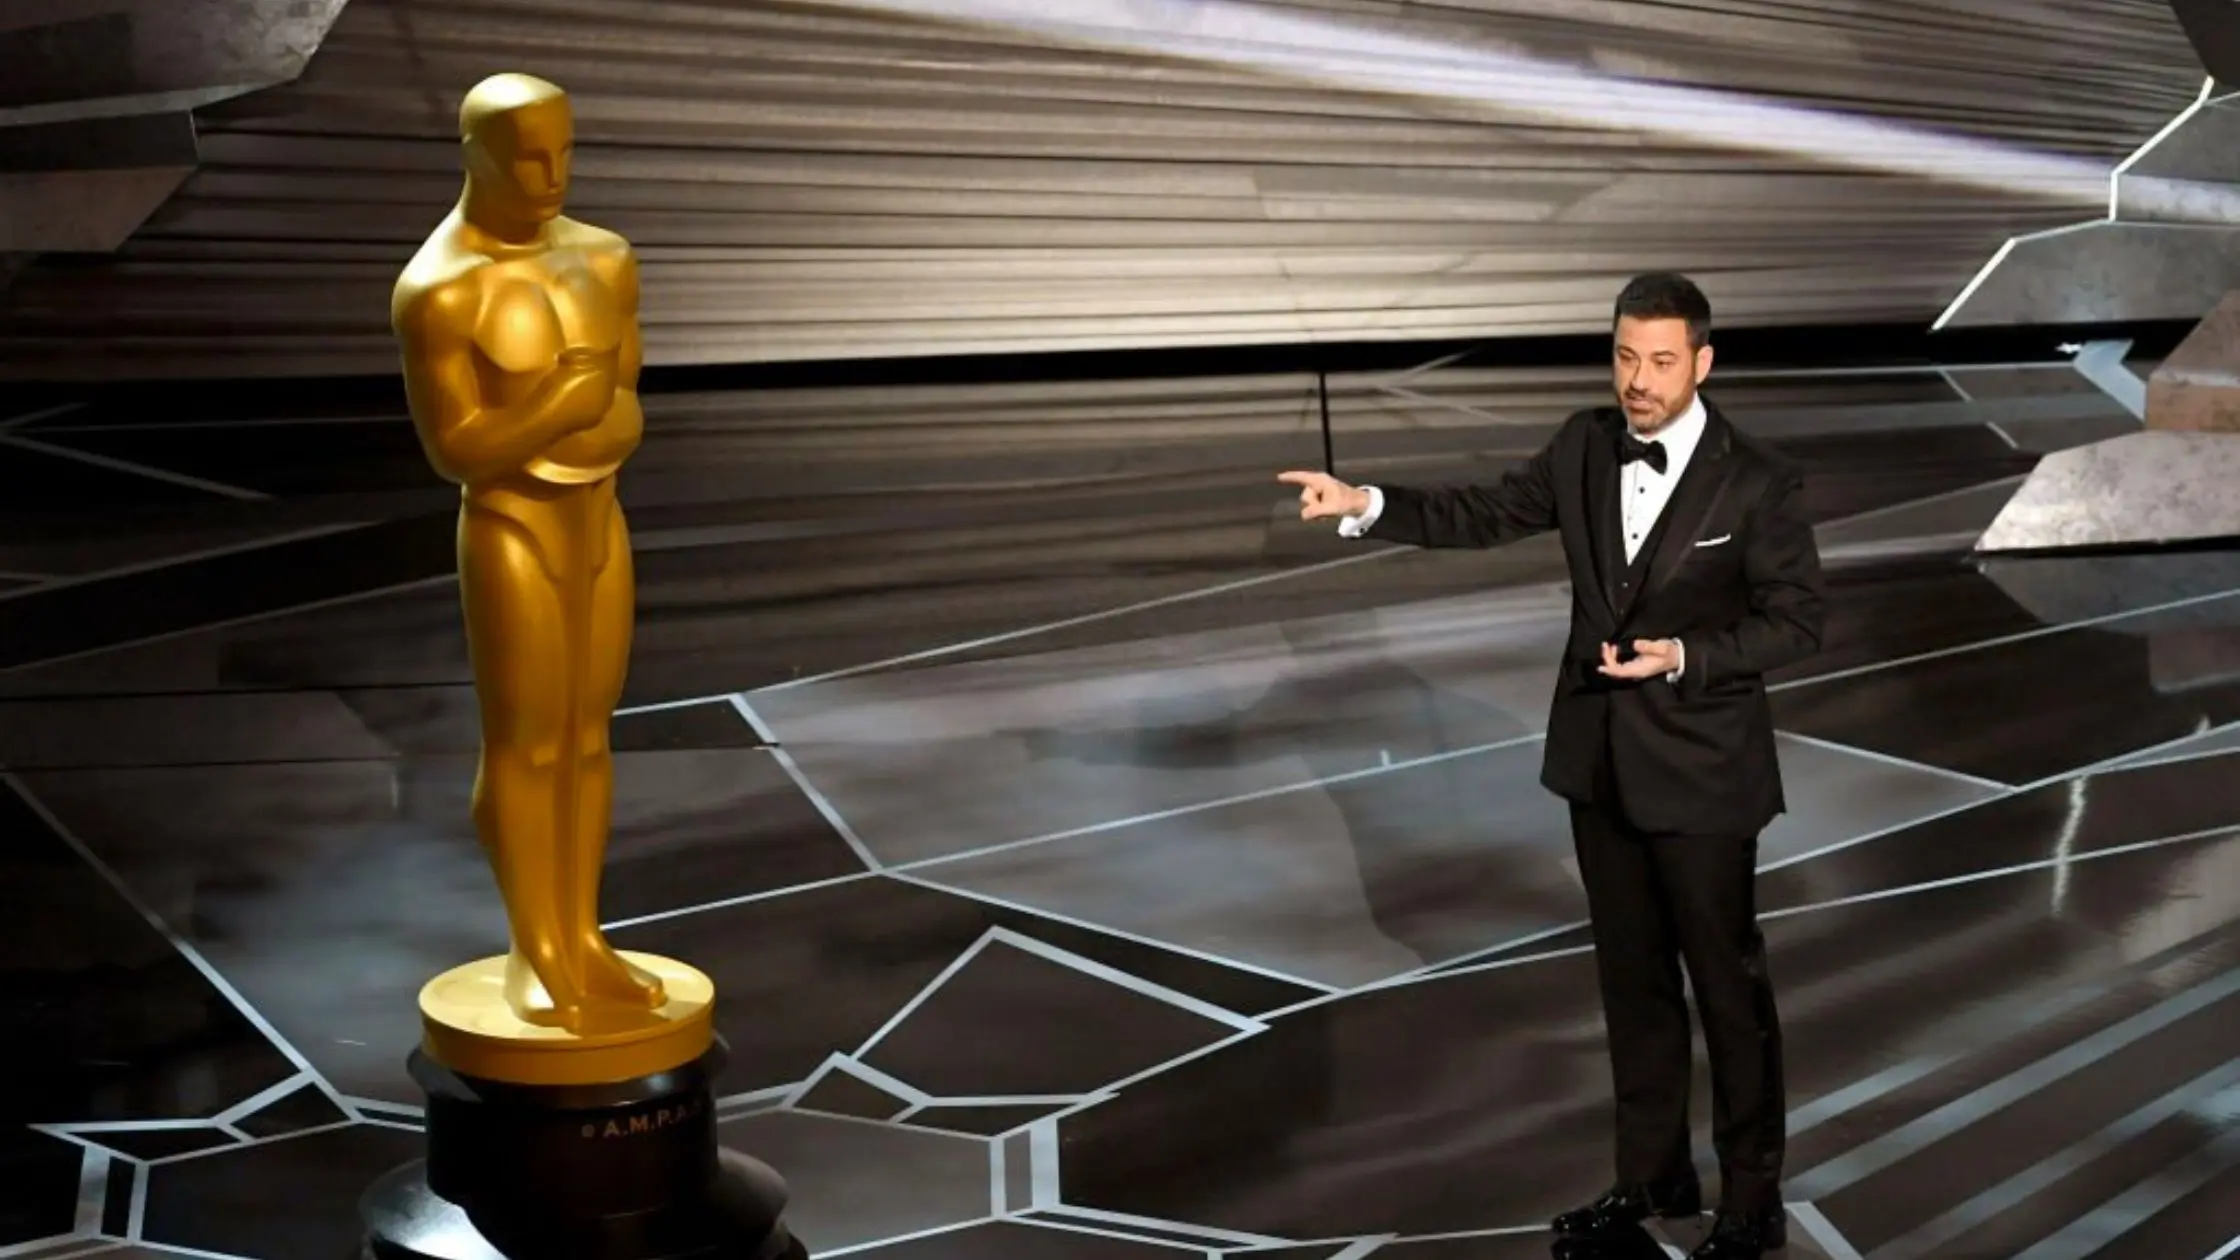 Jimmy Kimmel Weight Loss For Oscars